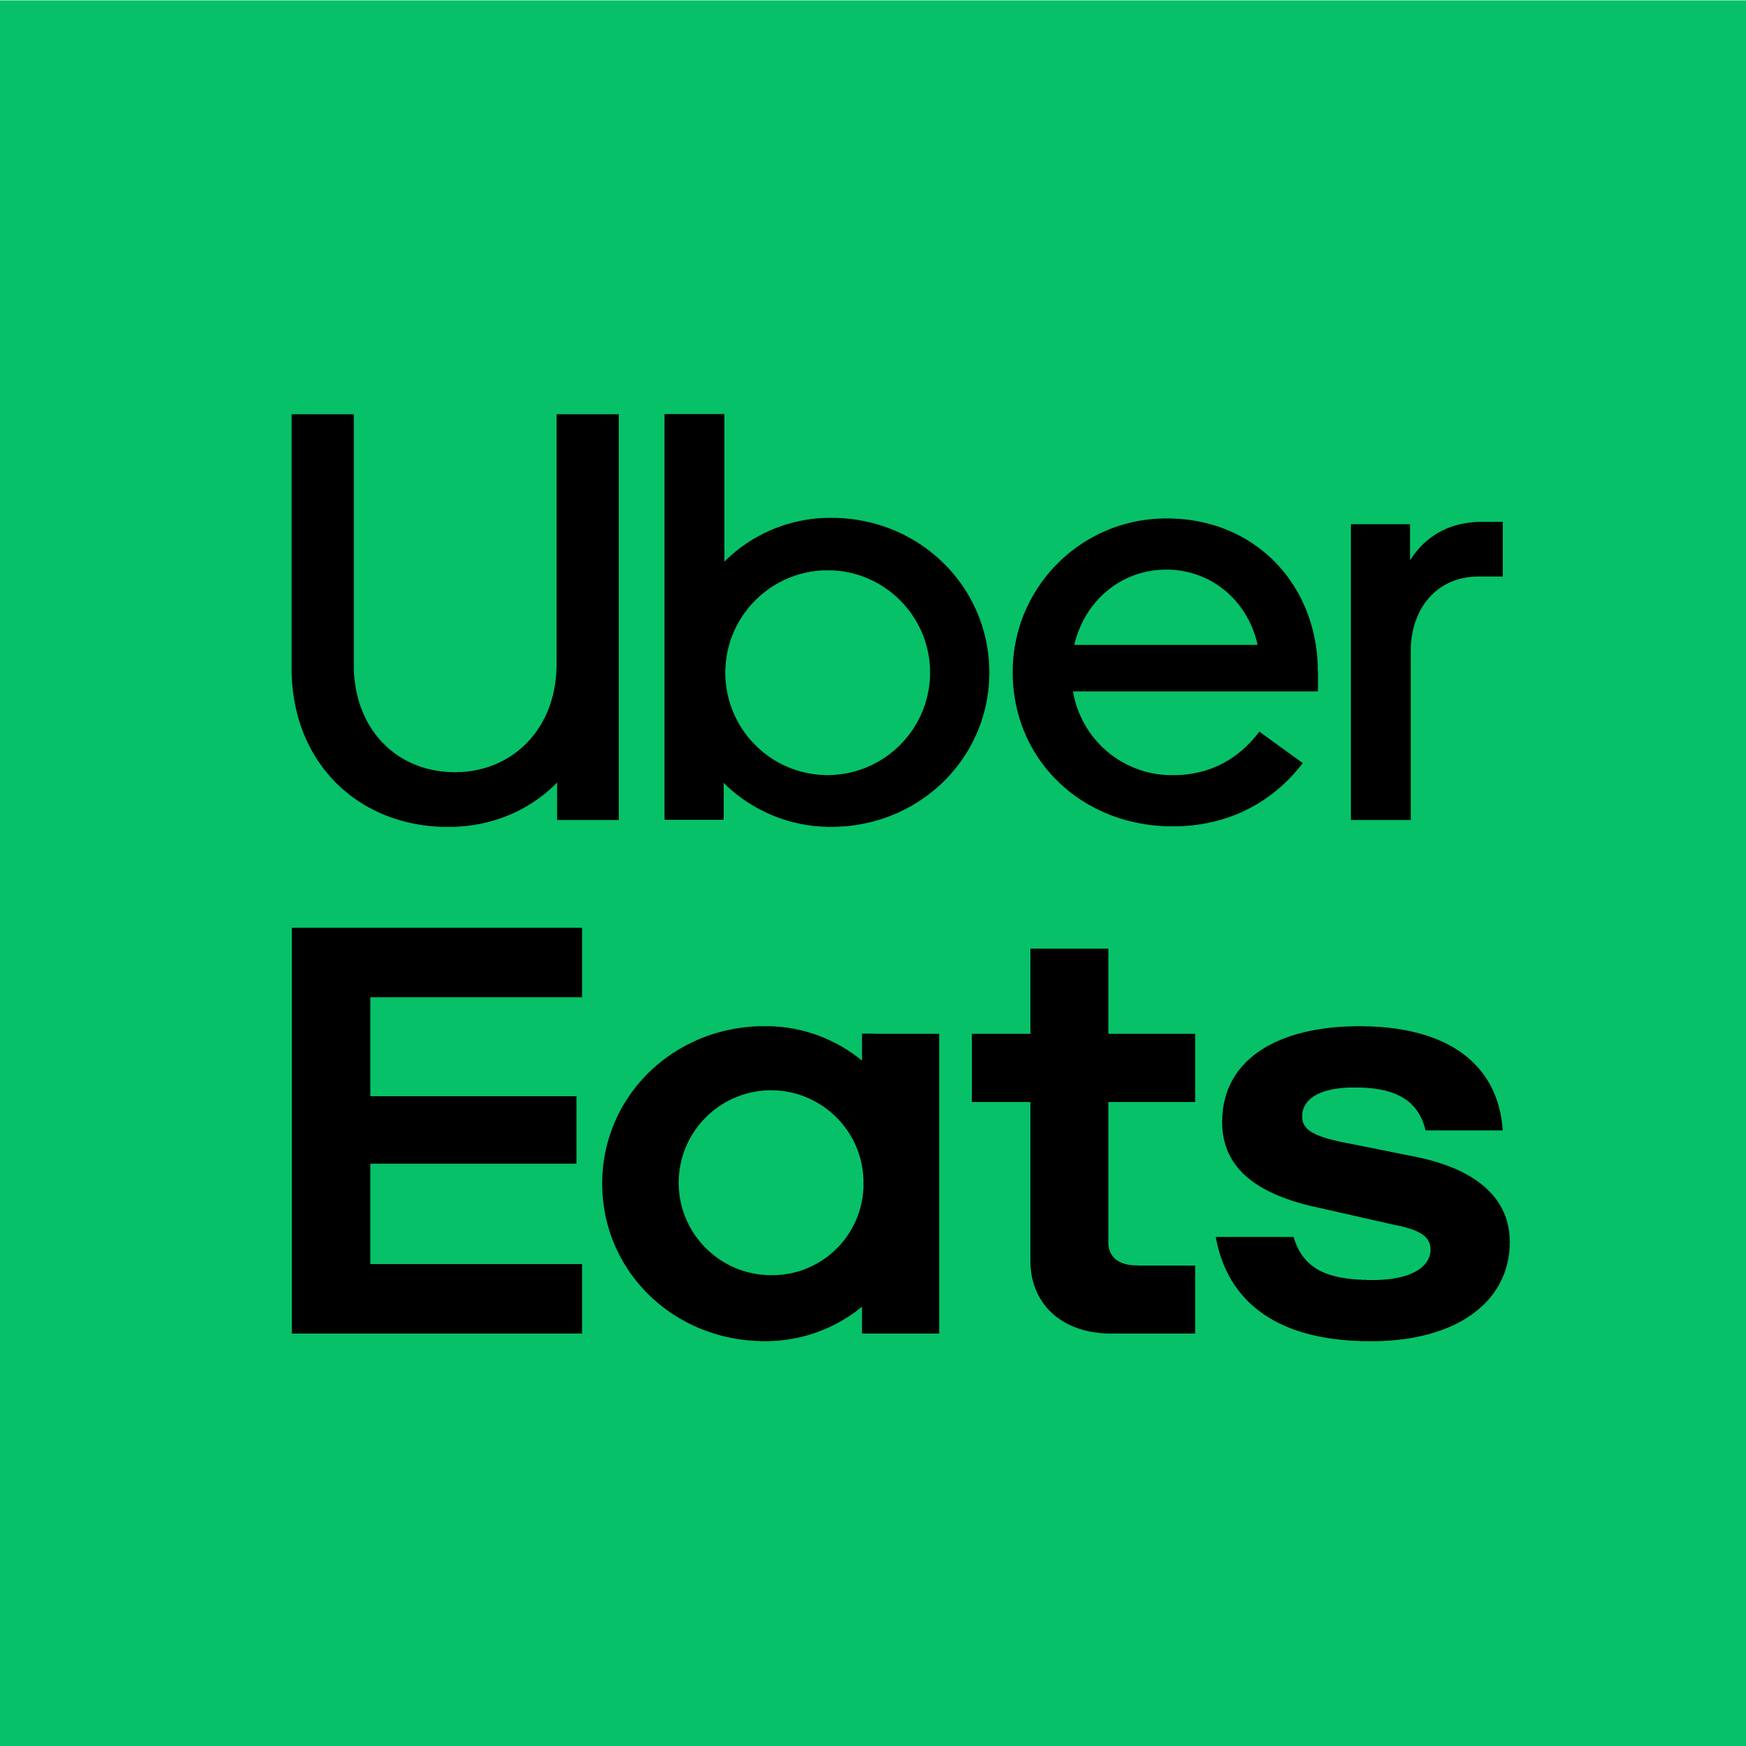 Select Uber Eats Accounts: $10 Off $20+ (Valid 5/20 only)